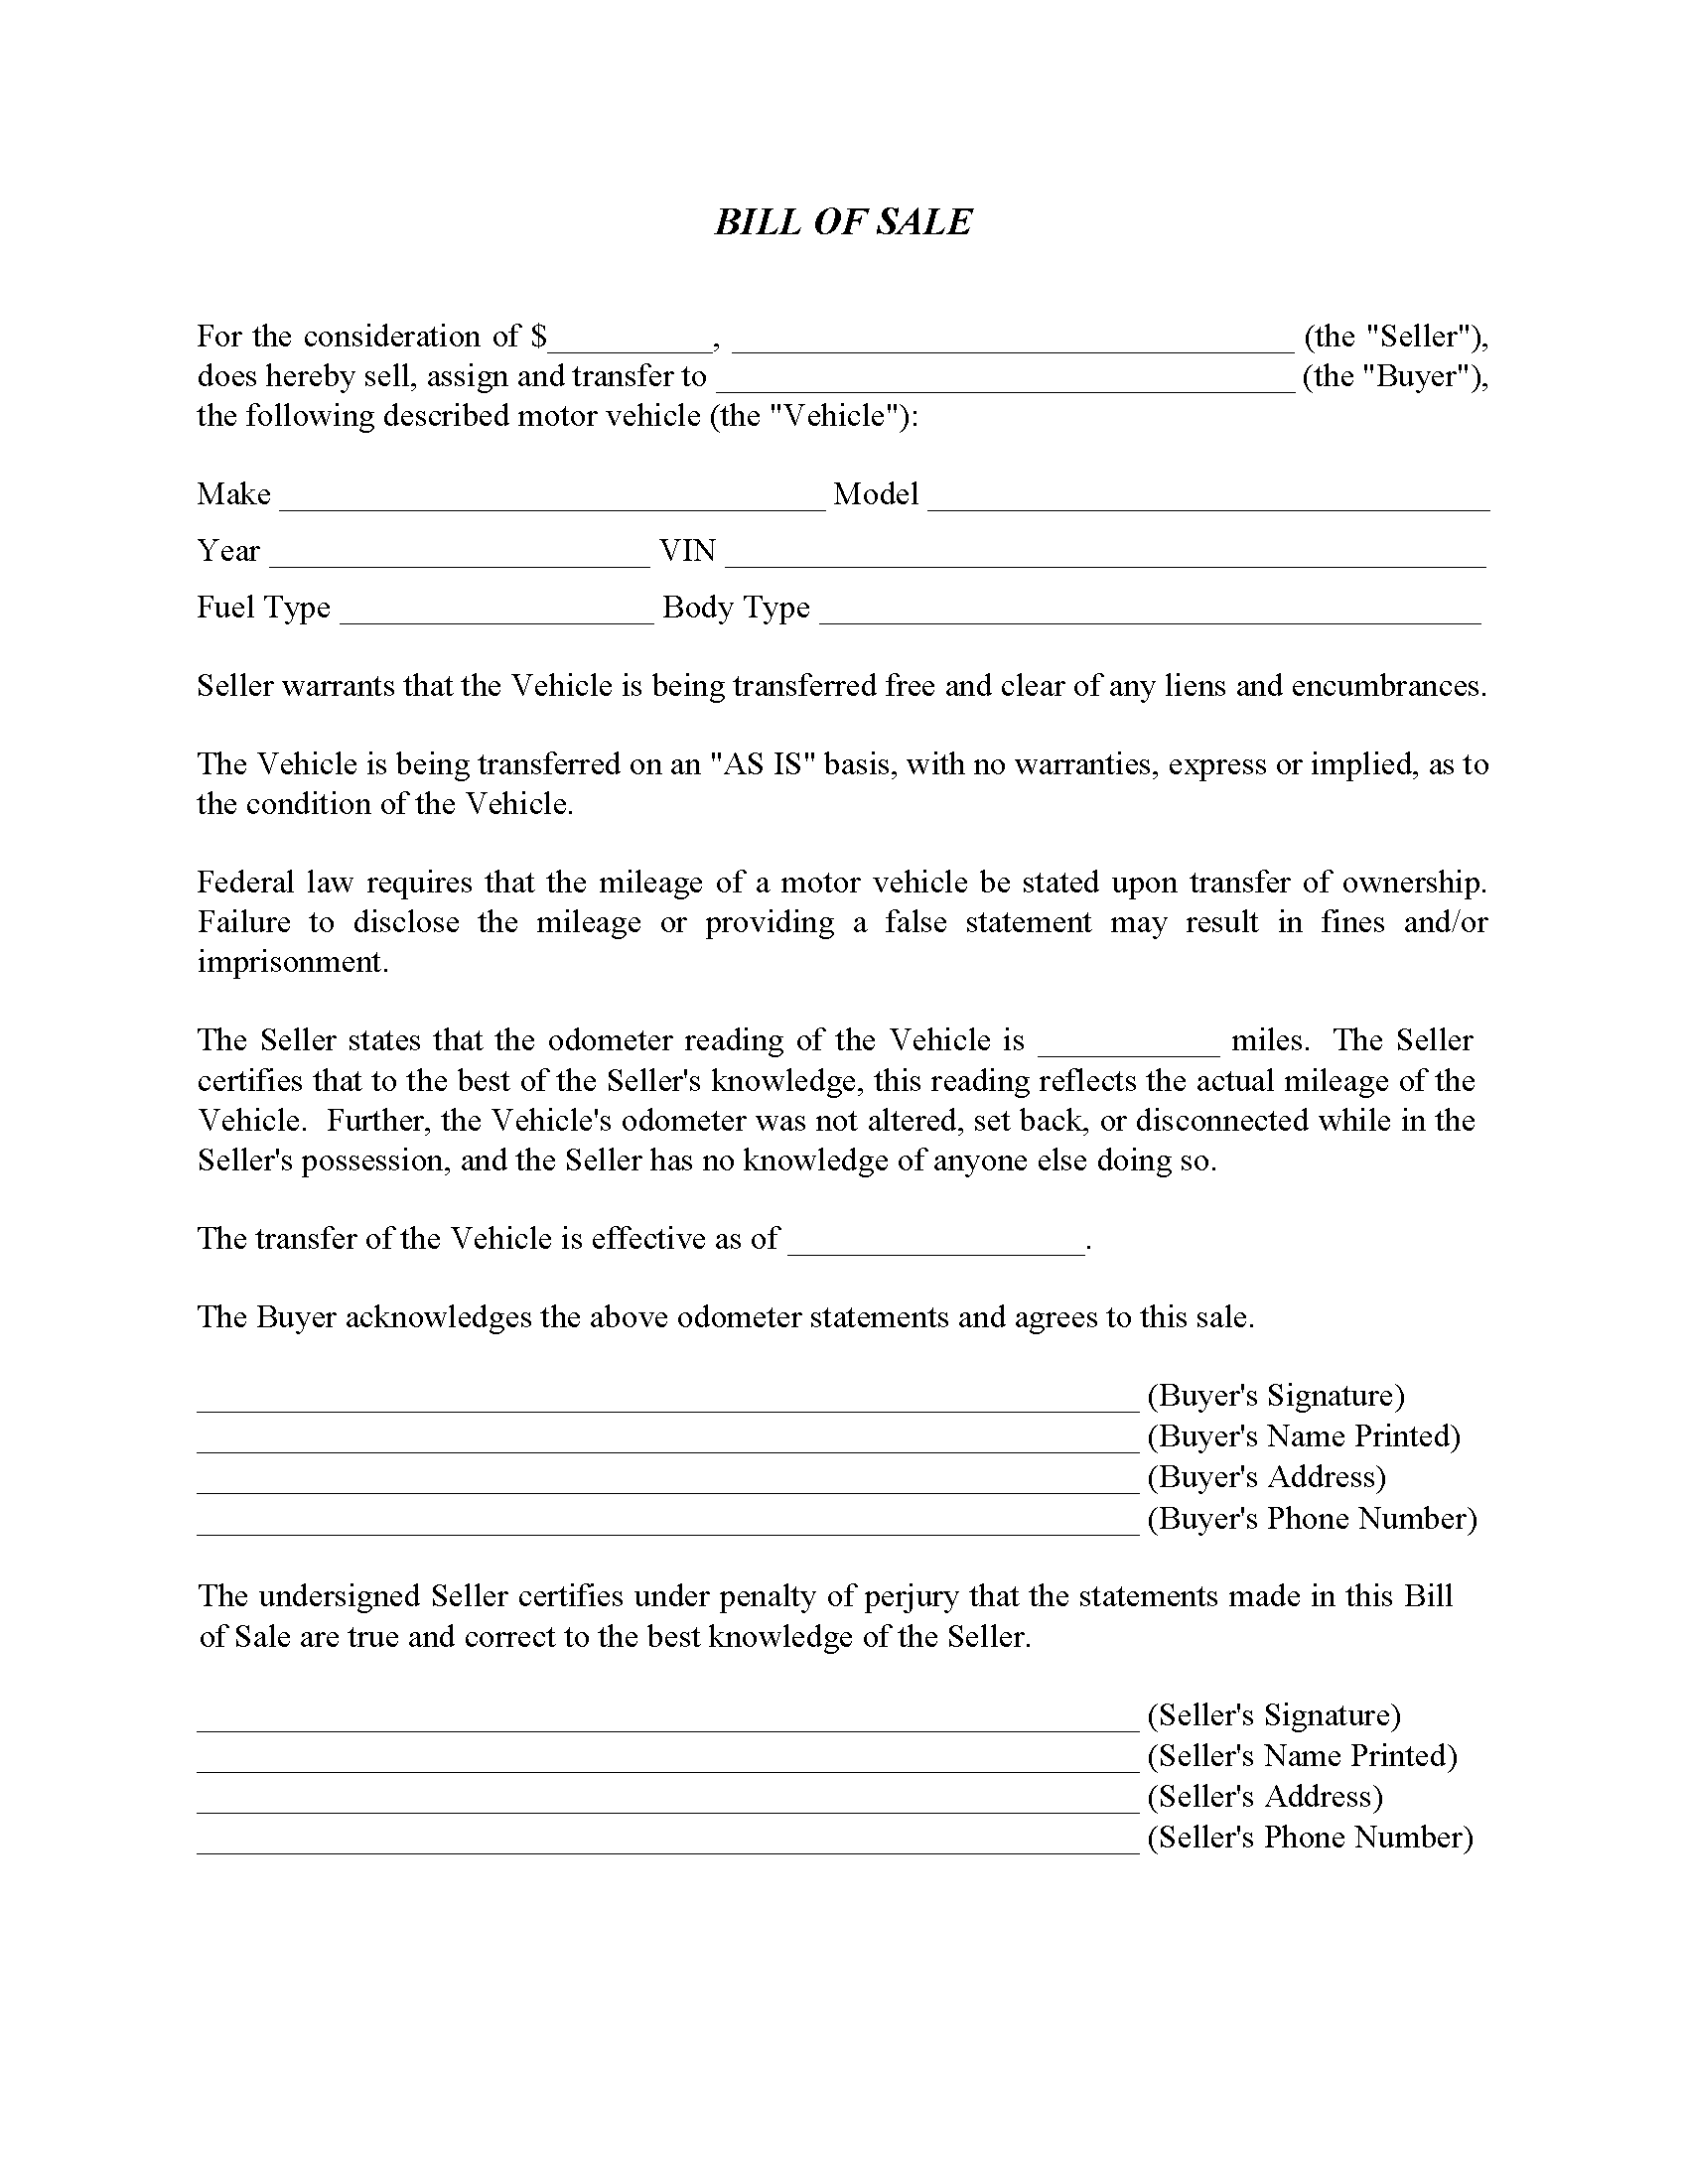 montana-motor-vehicle-bill-of-sale-form-free-printable-legal-forms